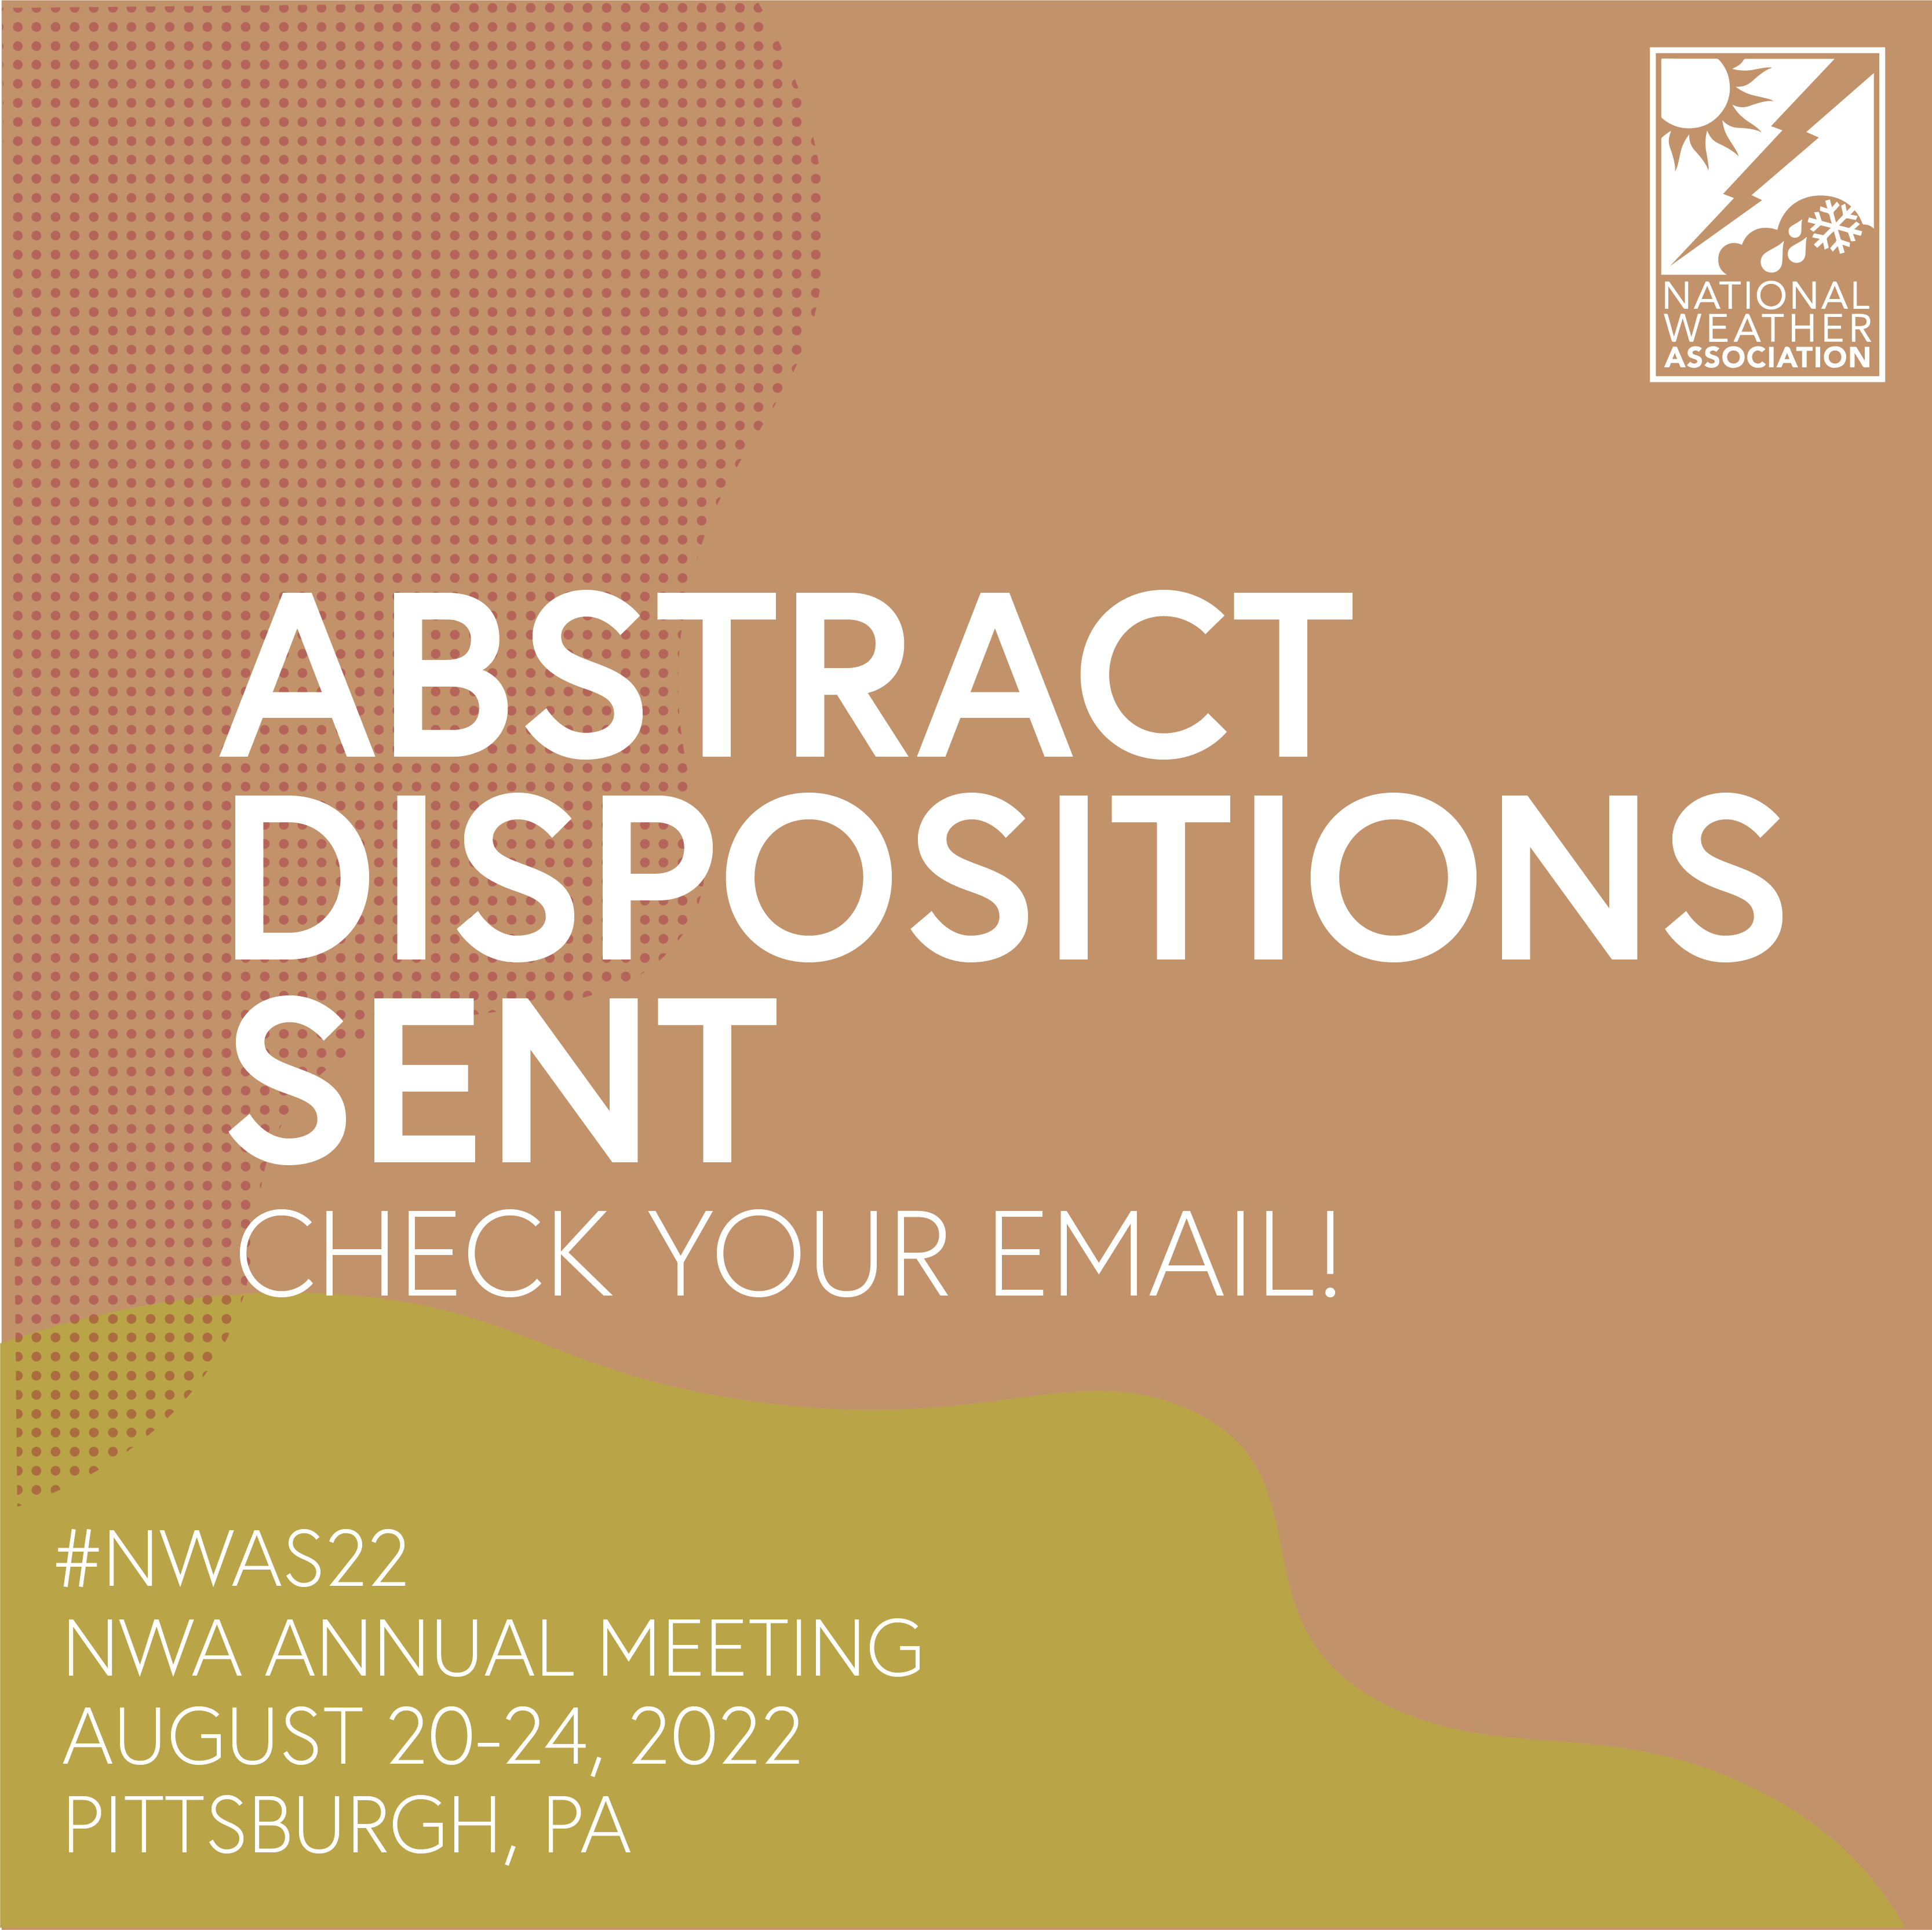 Dispositions sent out. Check your email.